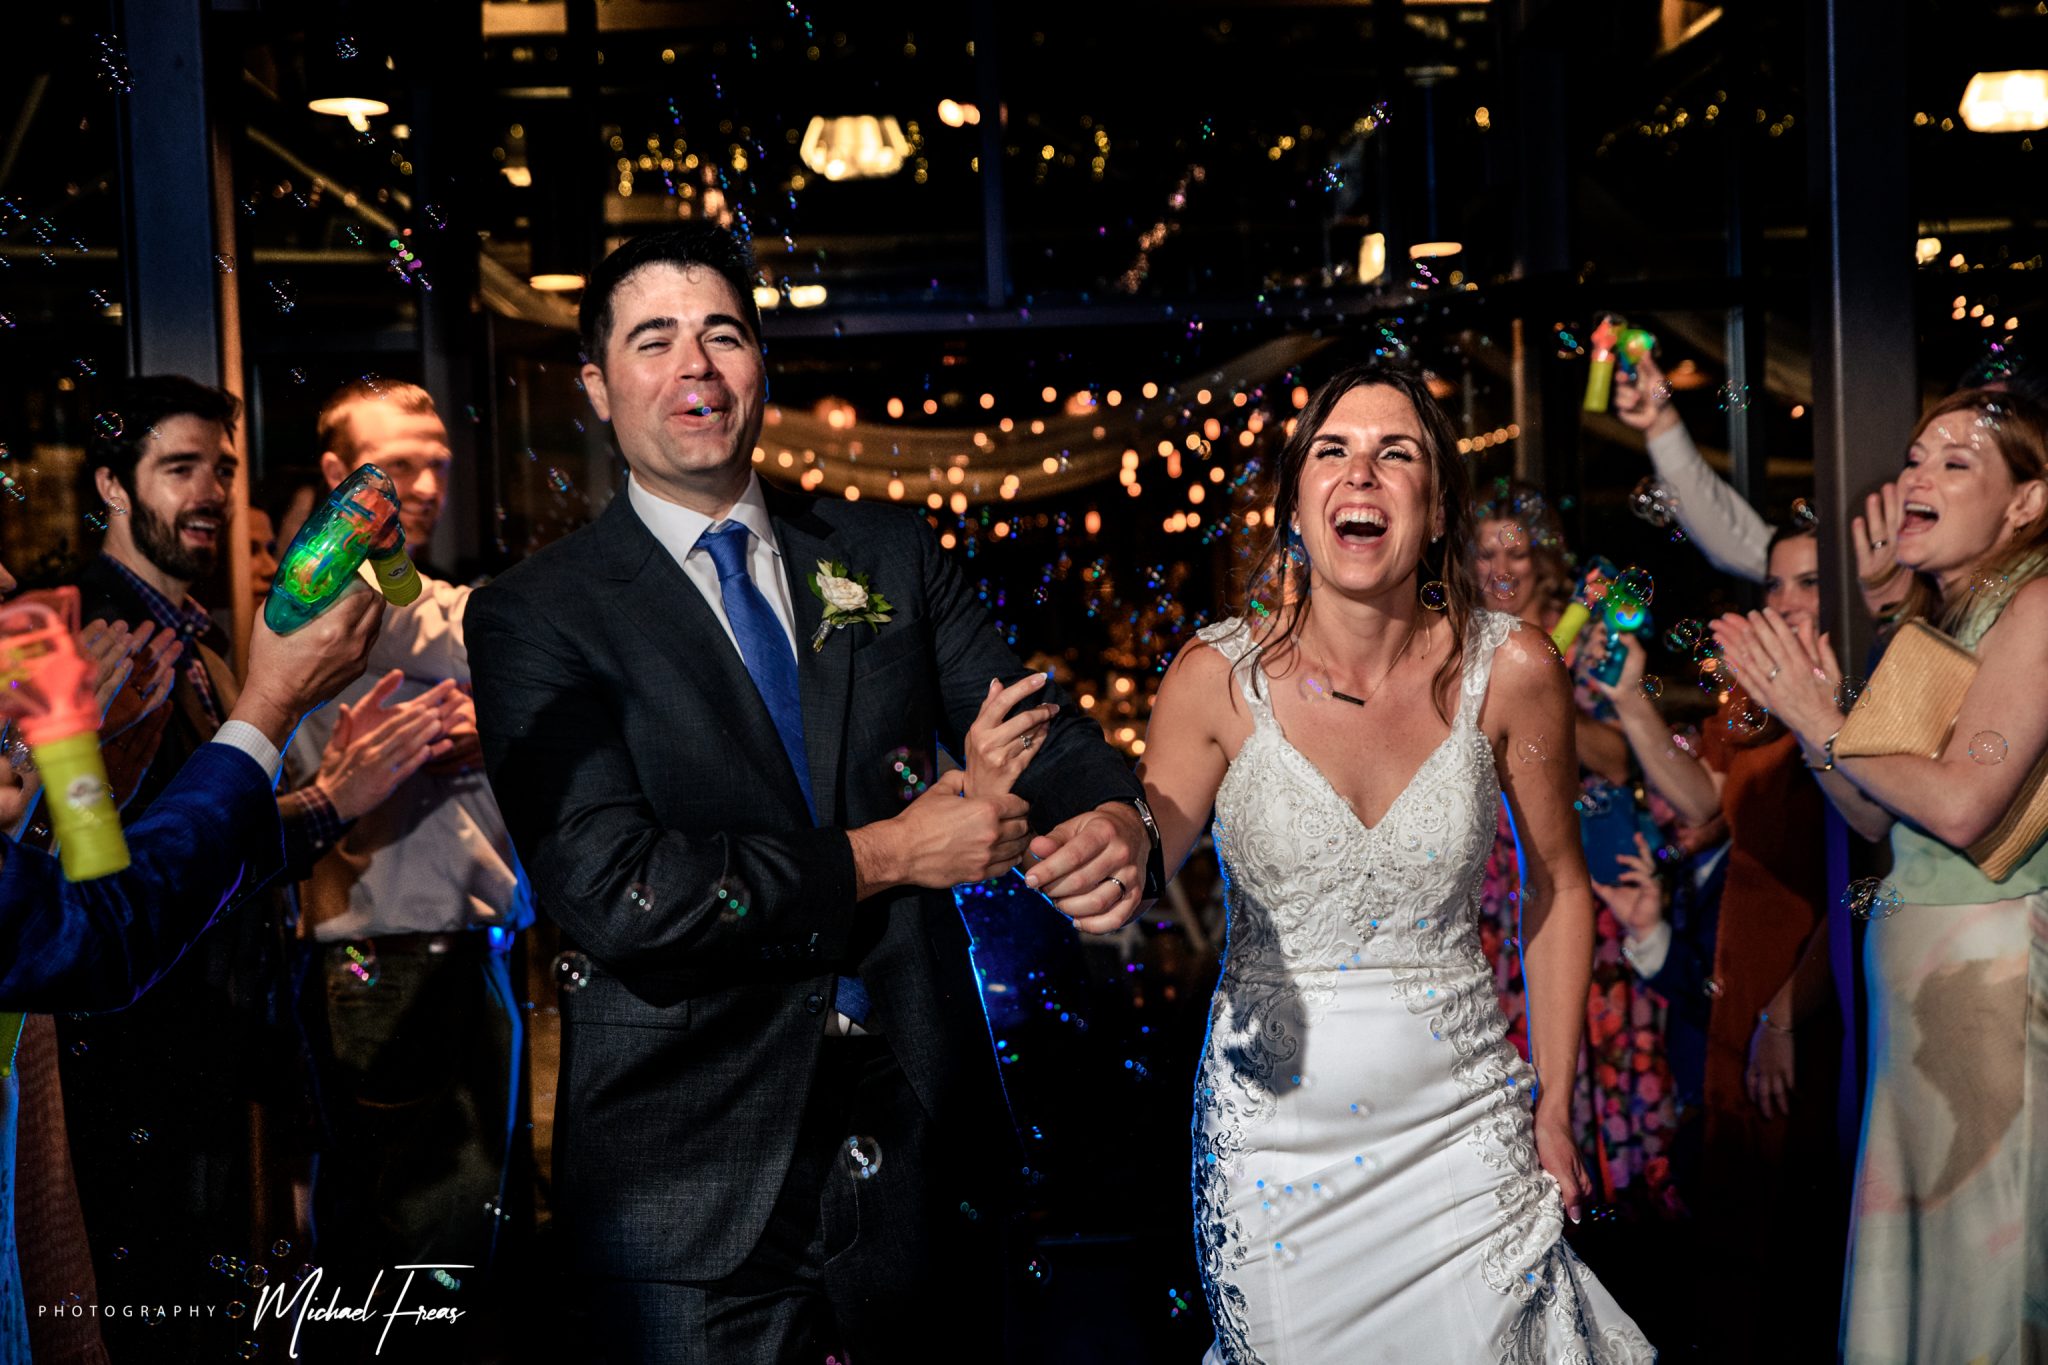 bride and groom making special exit through bubbles after wedding reception at crest pavilion